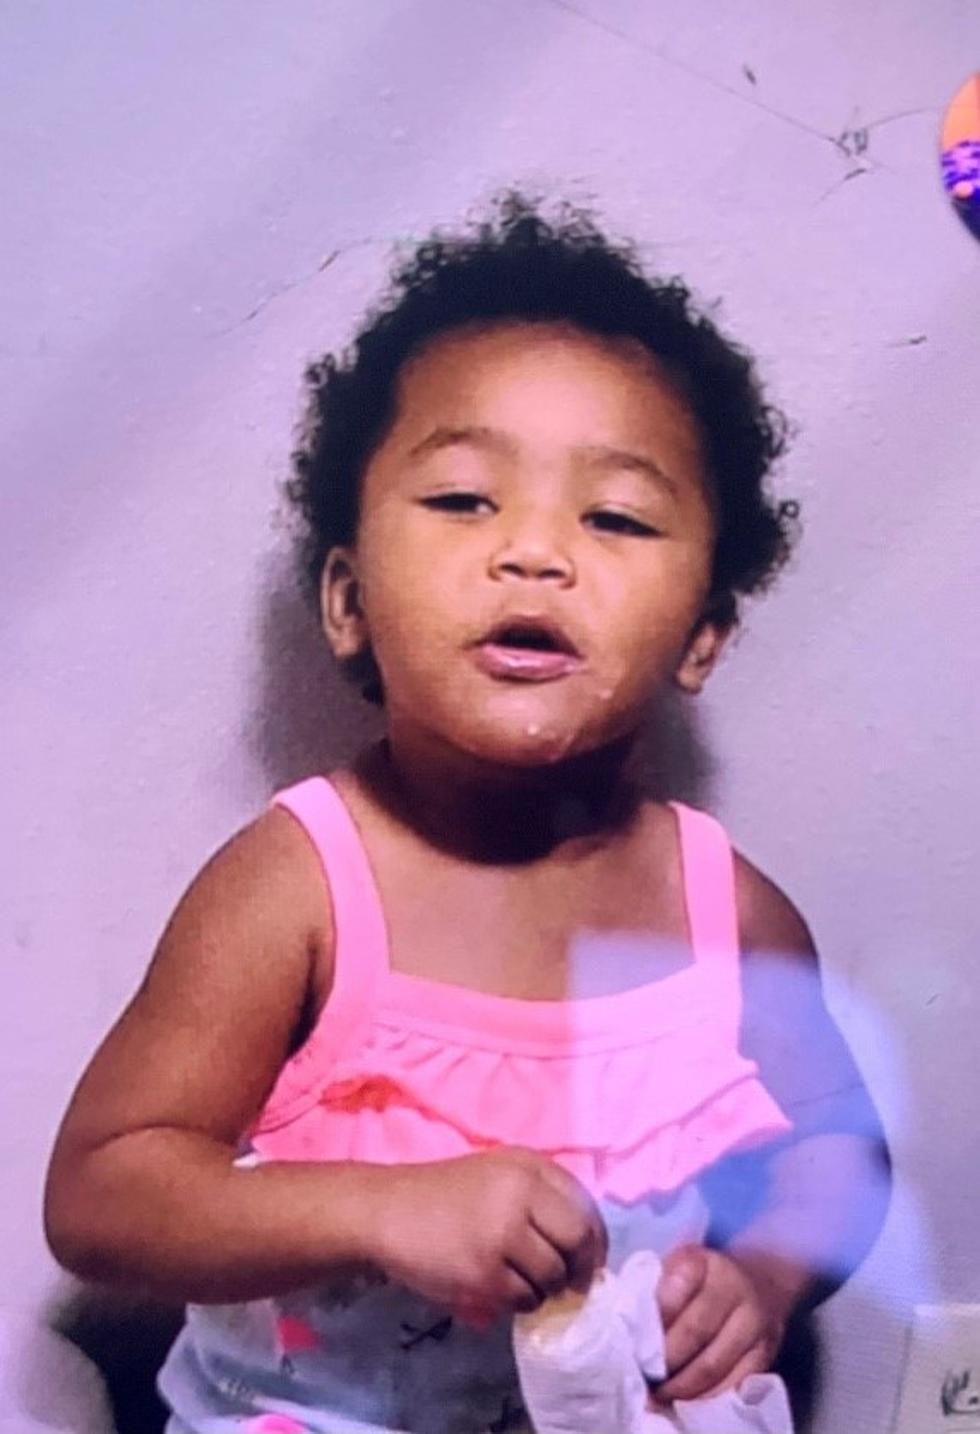 Frantic Search for Missing Toddler in South Louisiana